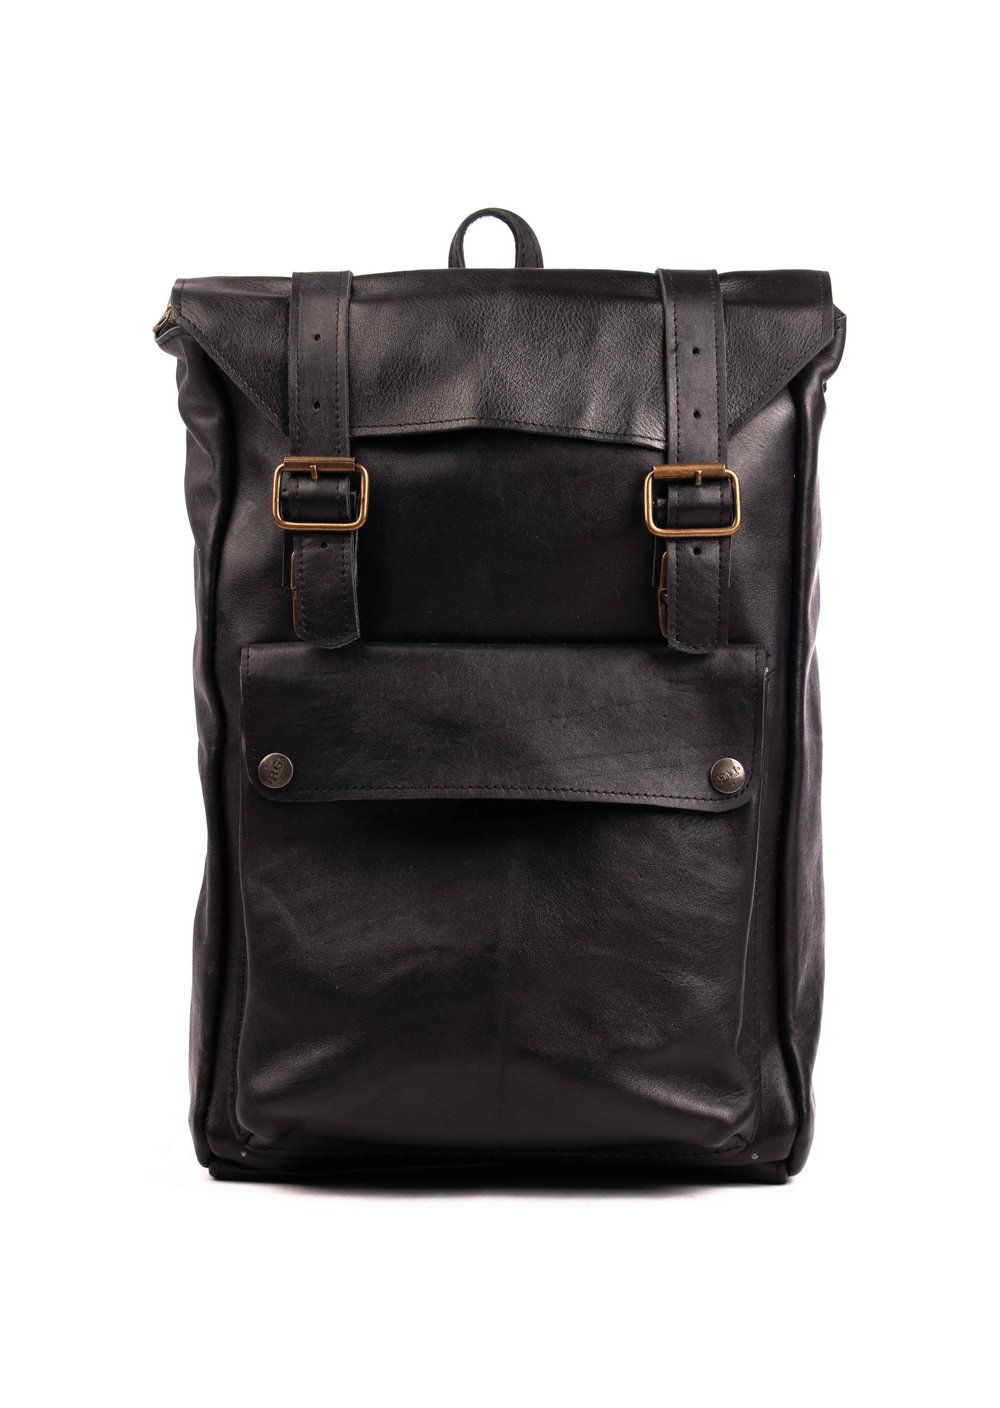 Black Leather Backpack Handmade Authentic Leather Backpack 